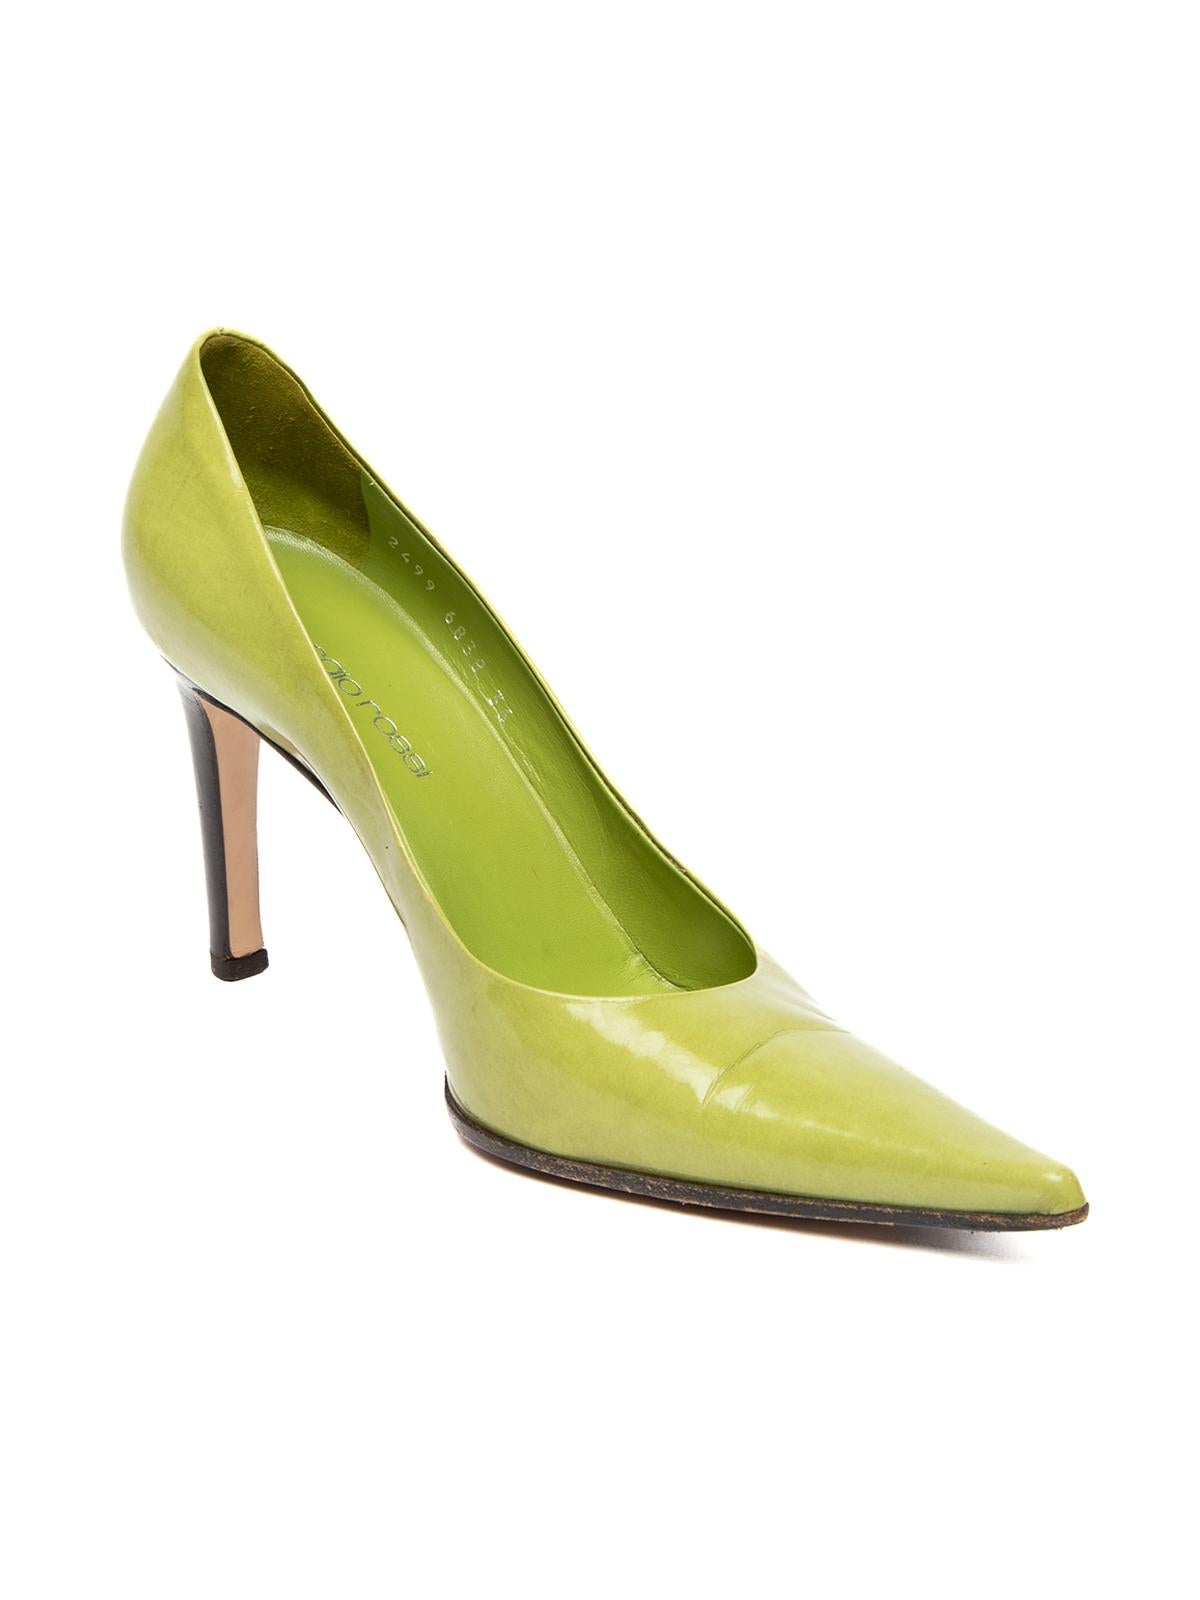 CONDITION is Fair, visible wear to soles, creasing to leather front interior, and slight discolorationon this used Sergio Rossi designer resale item. Details Green Leather Point-toe Stiletto mid-heel Leather insoles embossed with Sergio Rossi logo